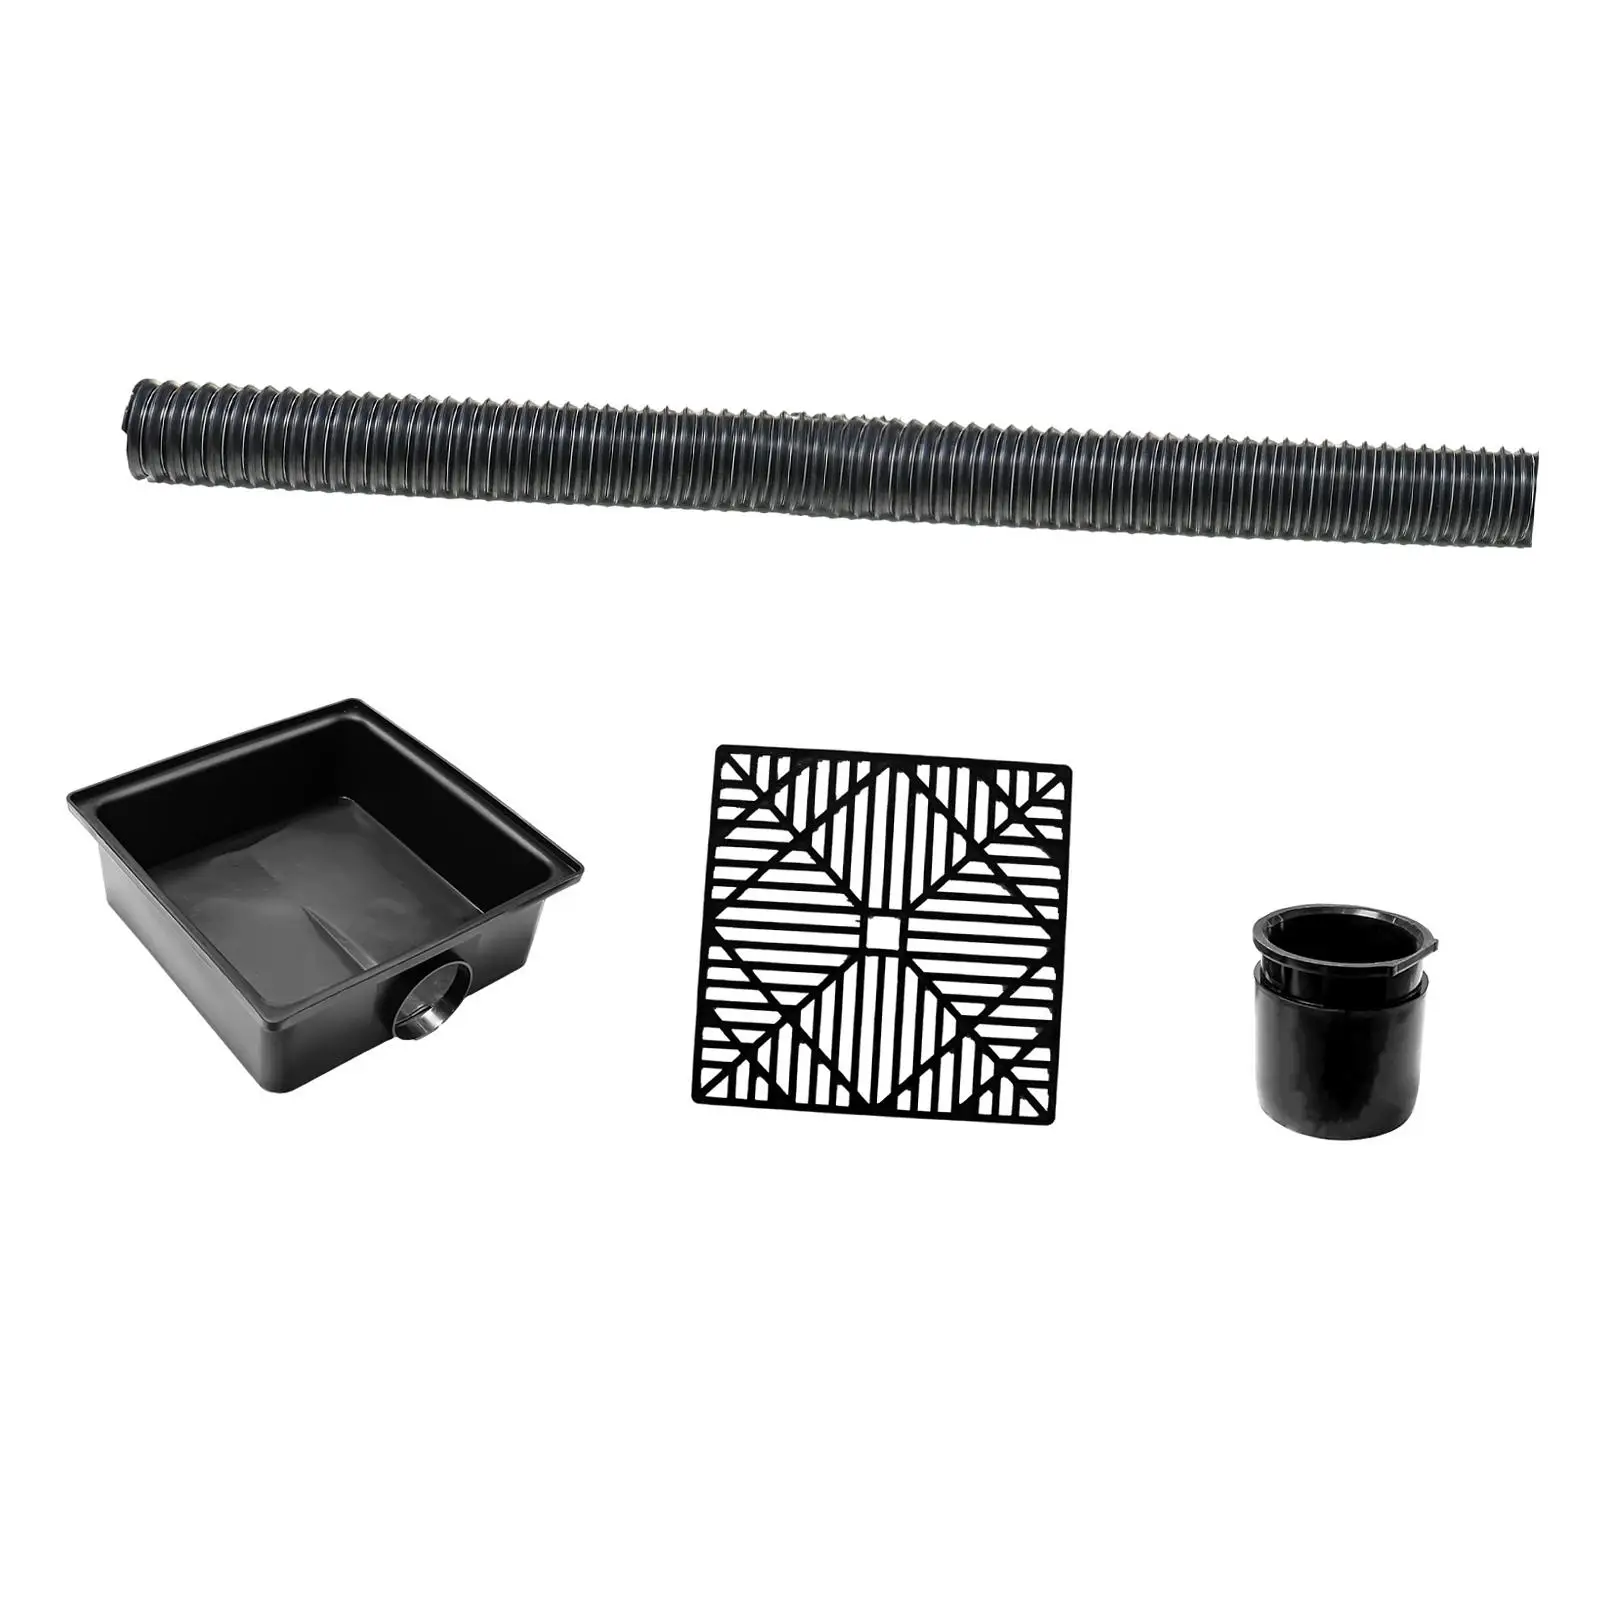 Catch Basin Downspout Extension Kit Rainwater Diverter Flexible Pipe Upgraded